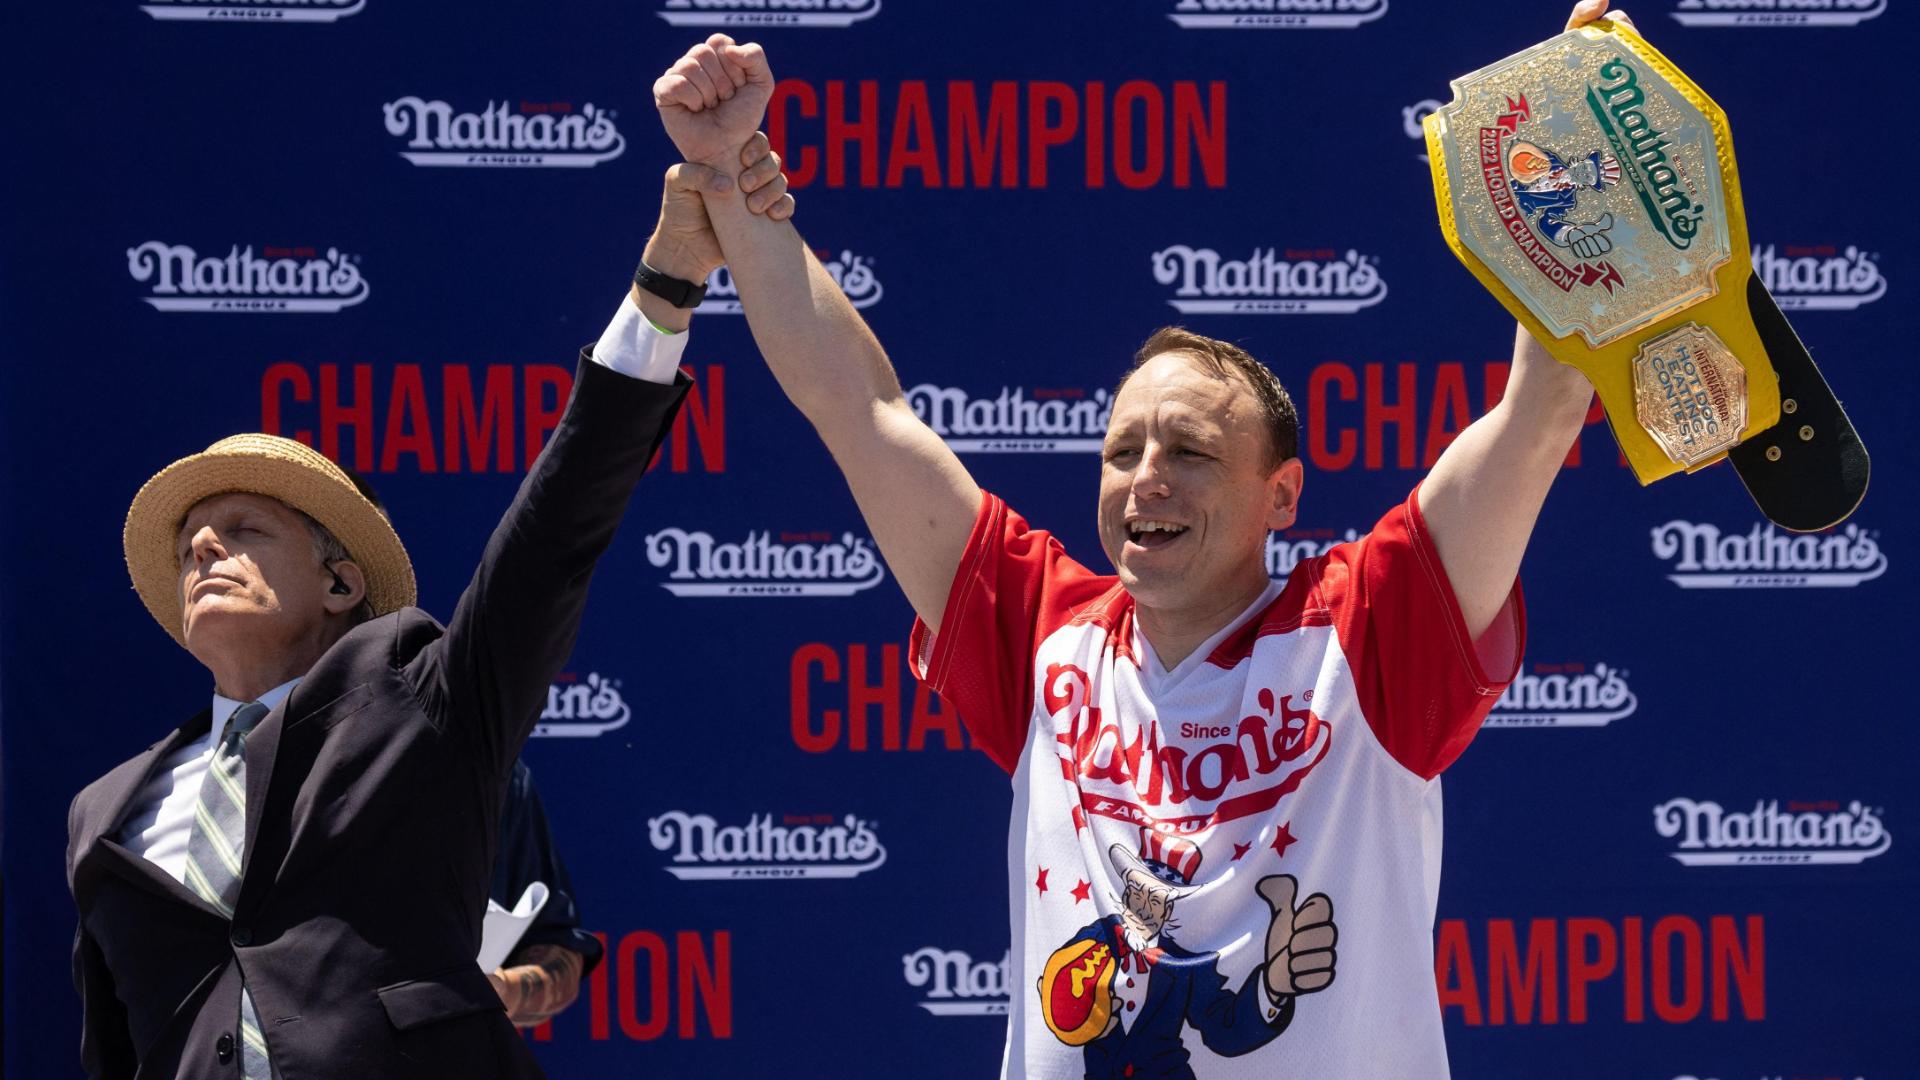 Joey 'Jaws' Chestnut, slowed by injury, captures 15th of hot dog eating contest title 63 franks and buns